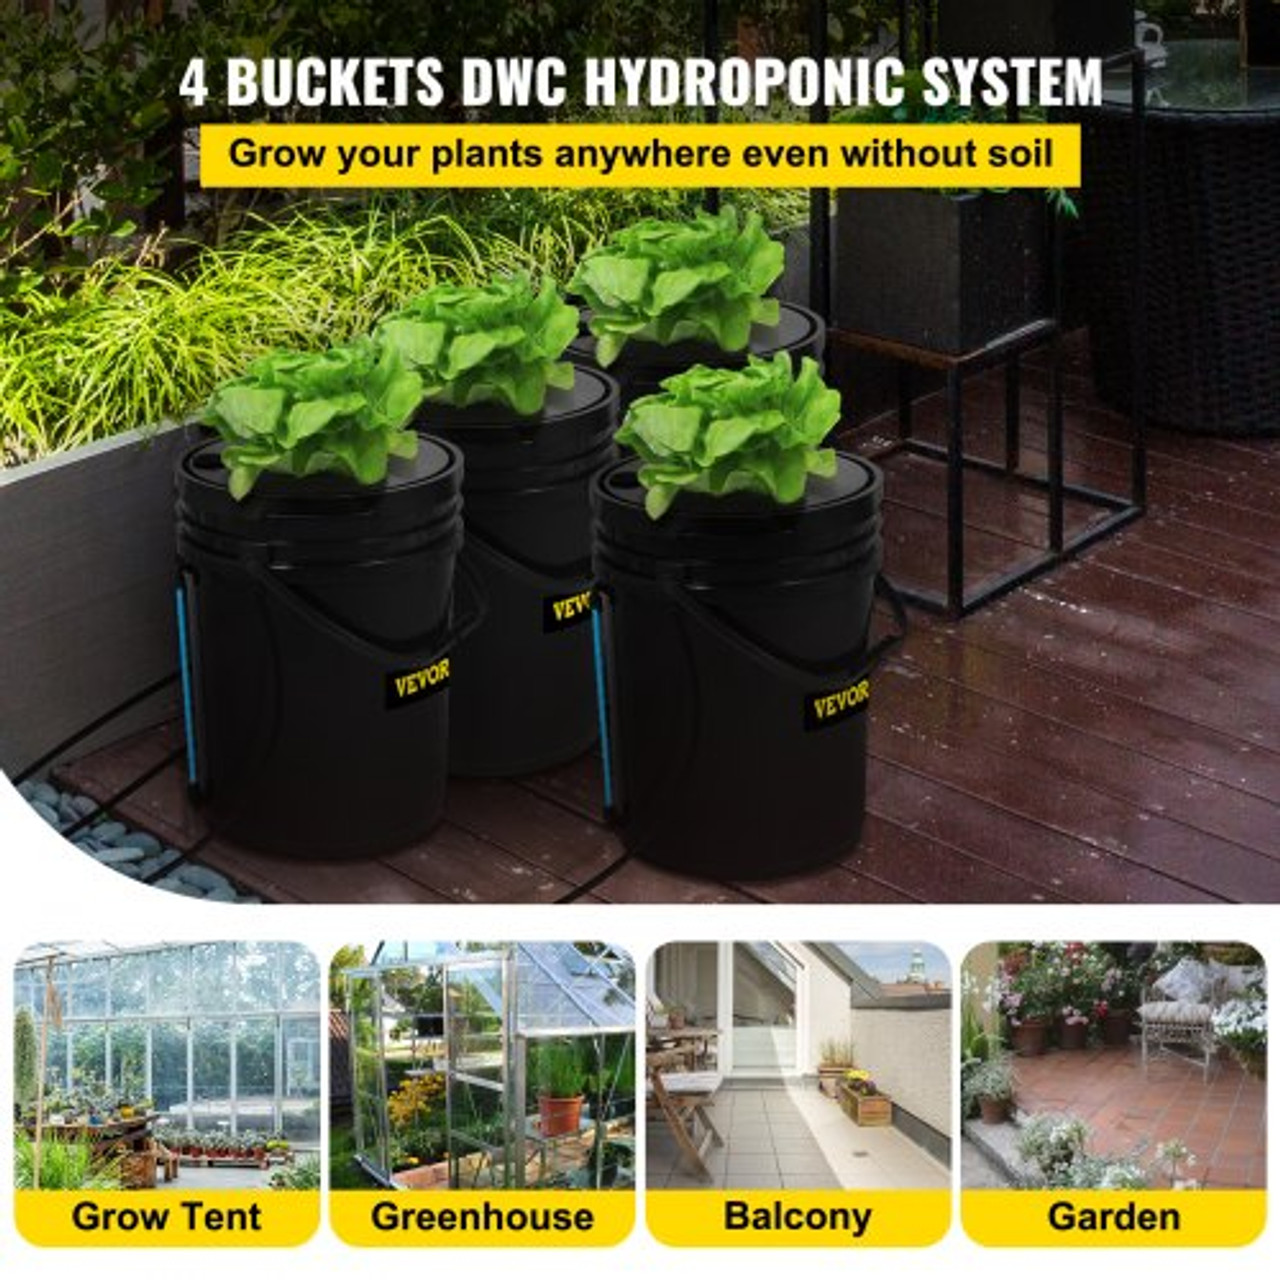 DWC Hydroponic System, 5 Gallon 4 Buckets, Deep Water Culture Growing Bucket, Hydroponics Grow Kit with Pump, Air Stone and Water Level Device, for Indoor/Outdoor Leafy Vegetables